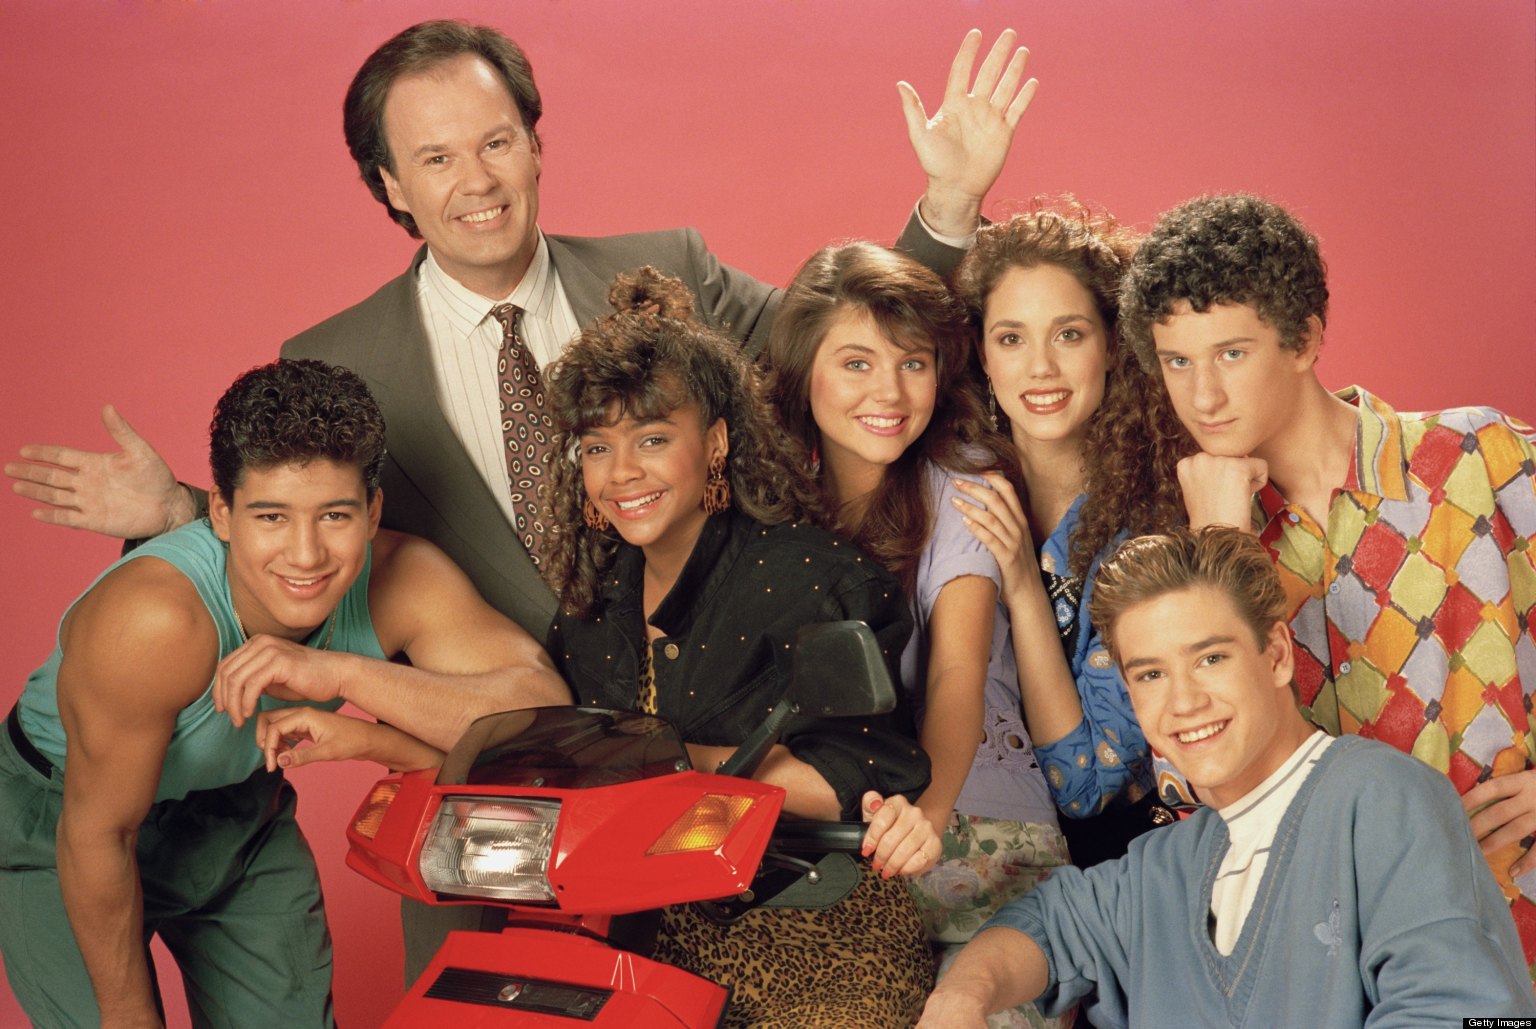 Peacock is Launching a ‘Saved By The Bell’ Channel Just Before the Reboot Premiere